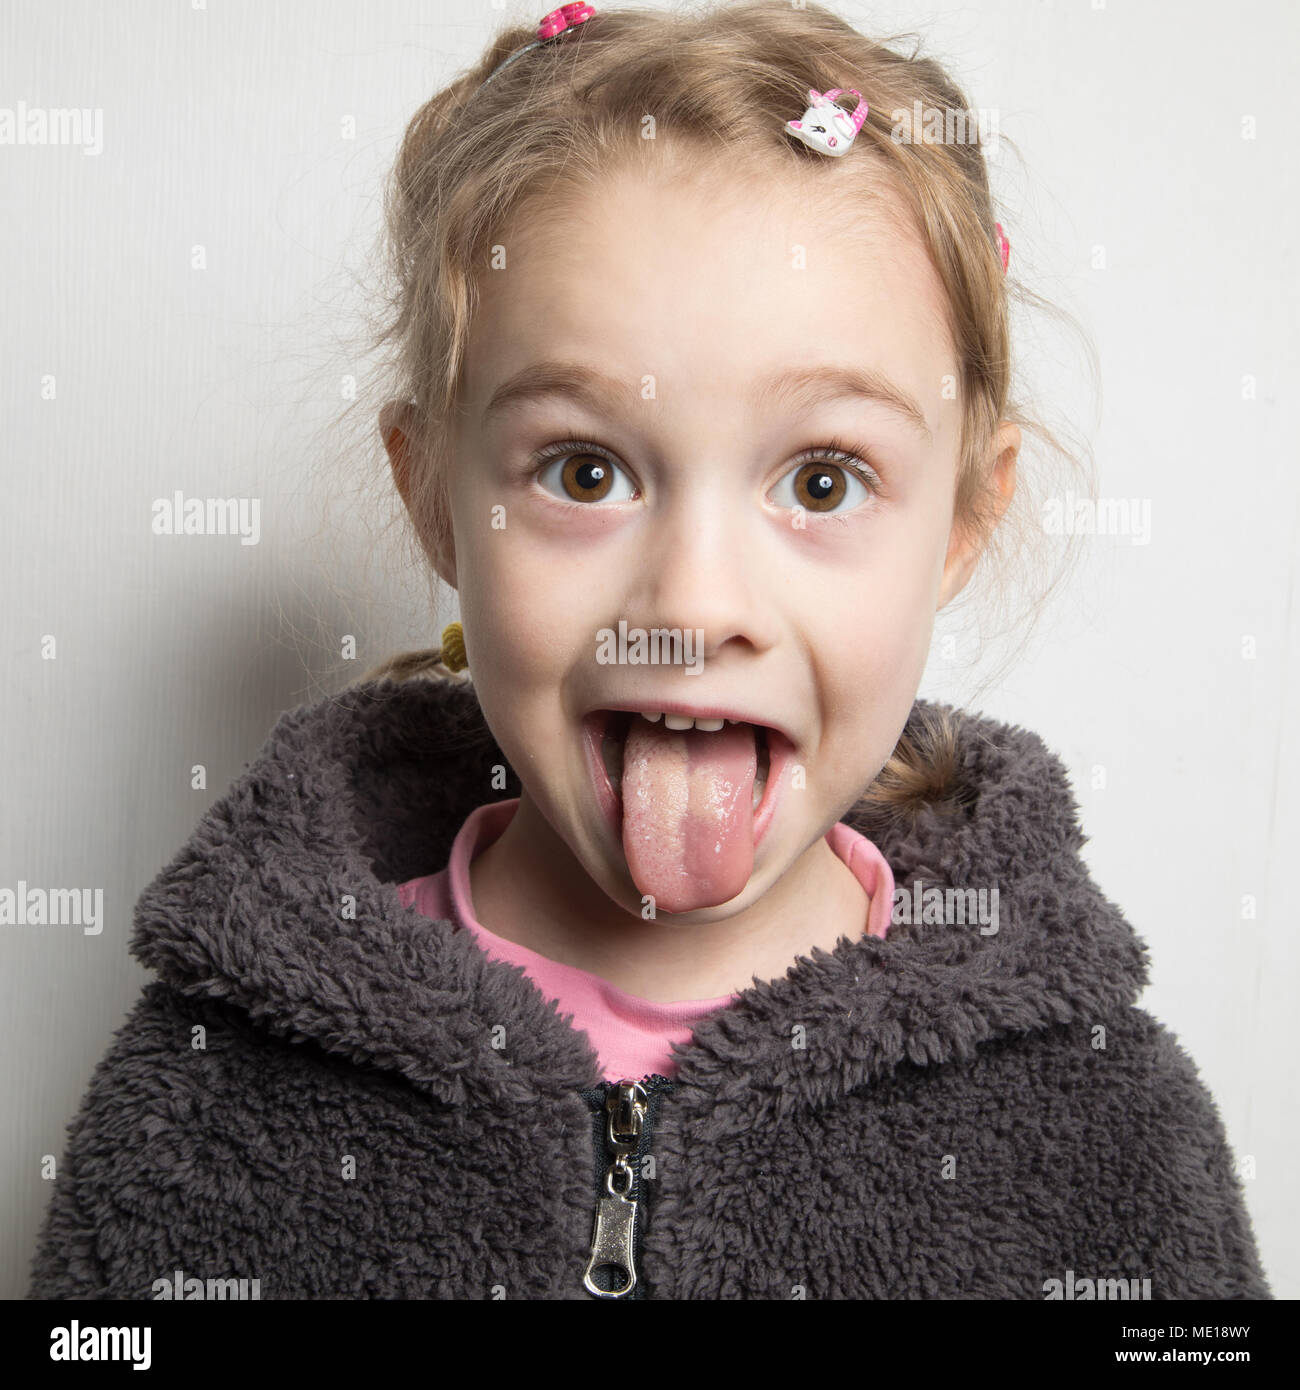 Top 100+ Images little girl mouth open tongue out Sharp